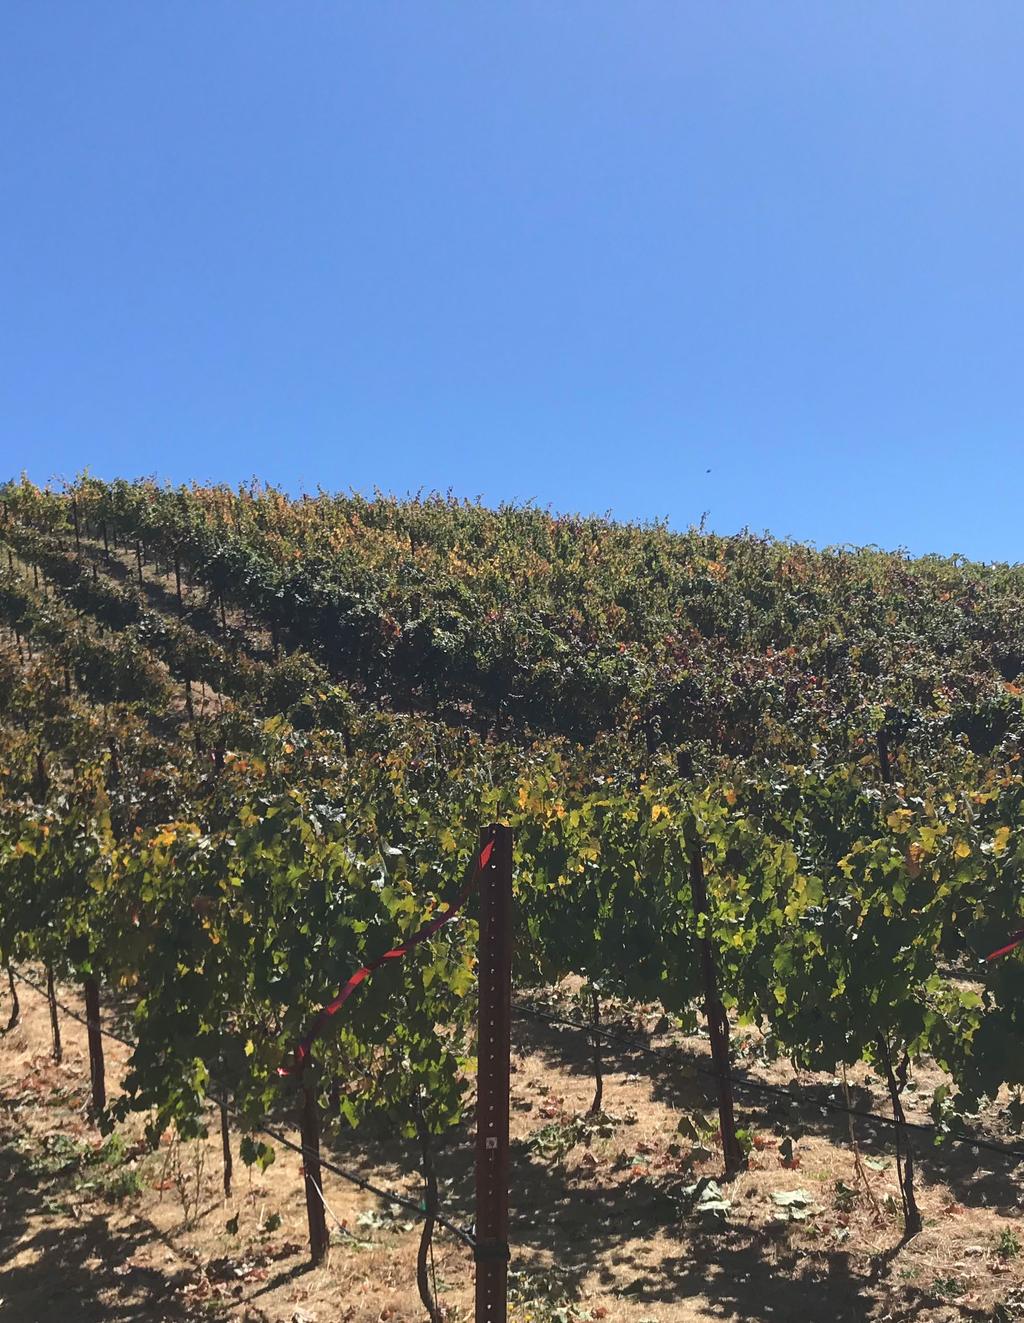 Salient Facts Address 8435 Highway 175 Hopland, CA 95449 County Mendocino APN 050-200-32 Total Main Residence Other Structures Vineyard Varietals Water Elevation Zoning 41.32 +/- acres 1,720 sq.ft.